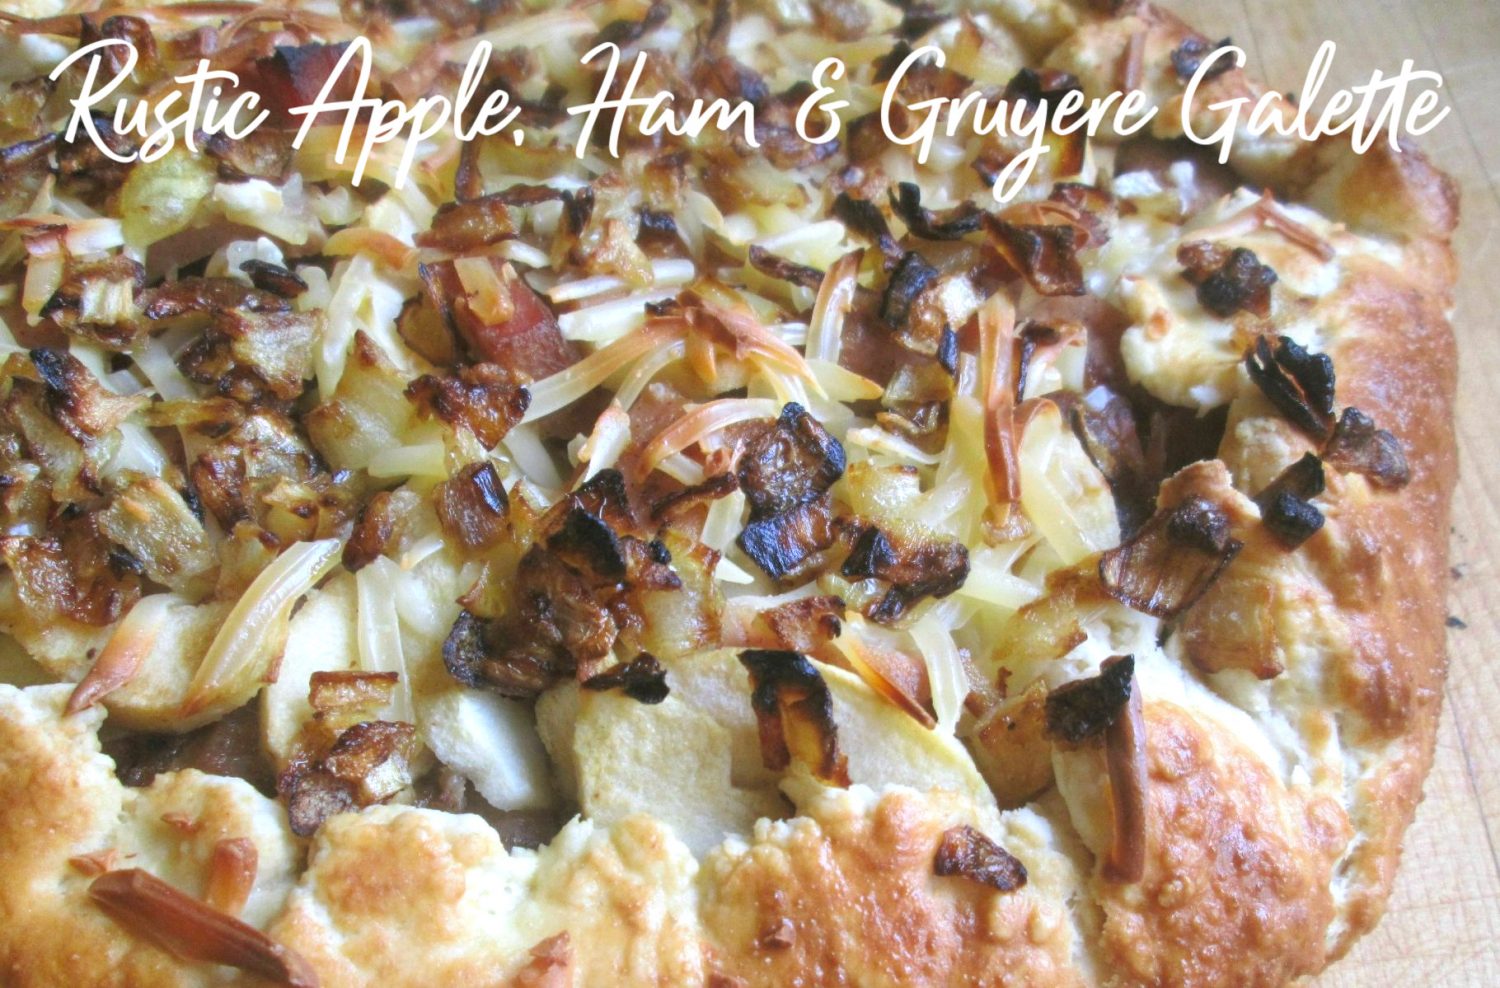 Layers of Crisp Tart Apples, Smokey Ham, and Gruyere Cheese with Balsamic-Honey Mustard in a rustic Galette crust will keep your taste buds wanting more!